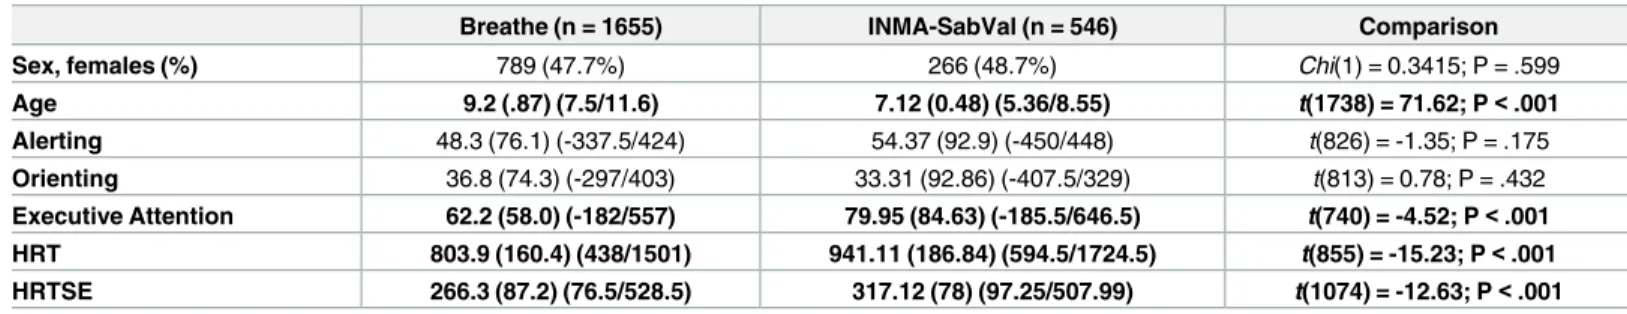 Table 1. Descriptive data for the variables of the study for the discovery (Breathe) and replication (INMA-SabVal) samples